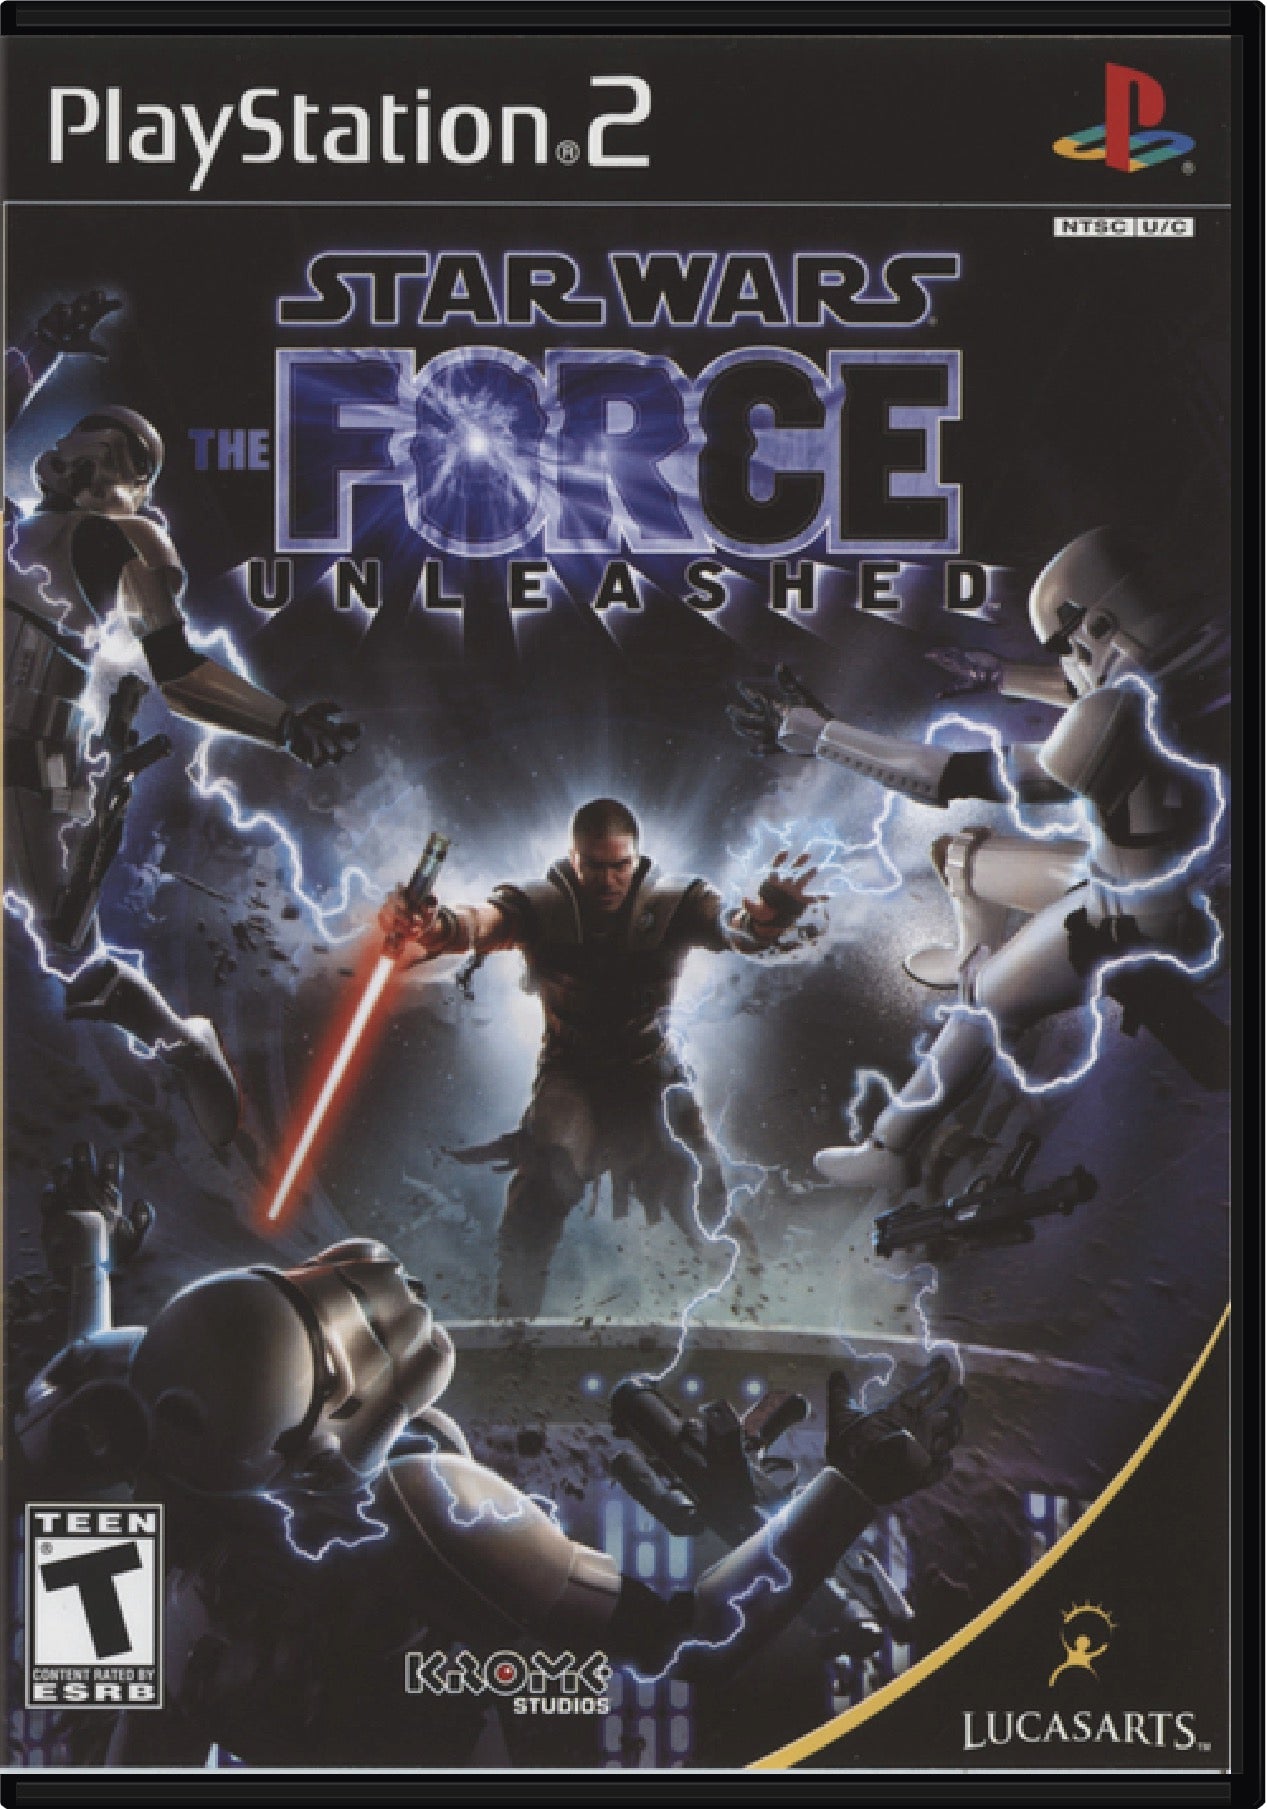 Star Wars The Force Unleashed Cover Art and Product Photo